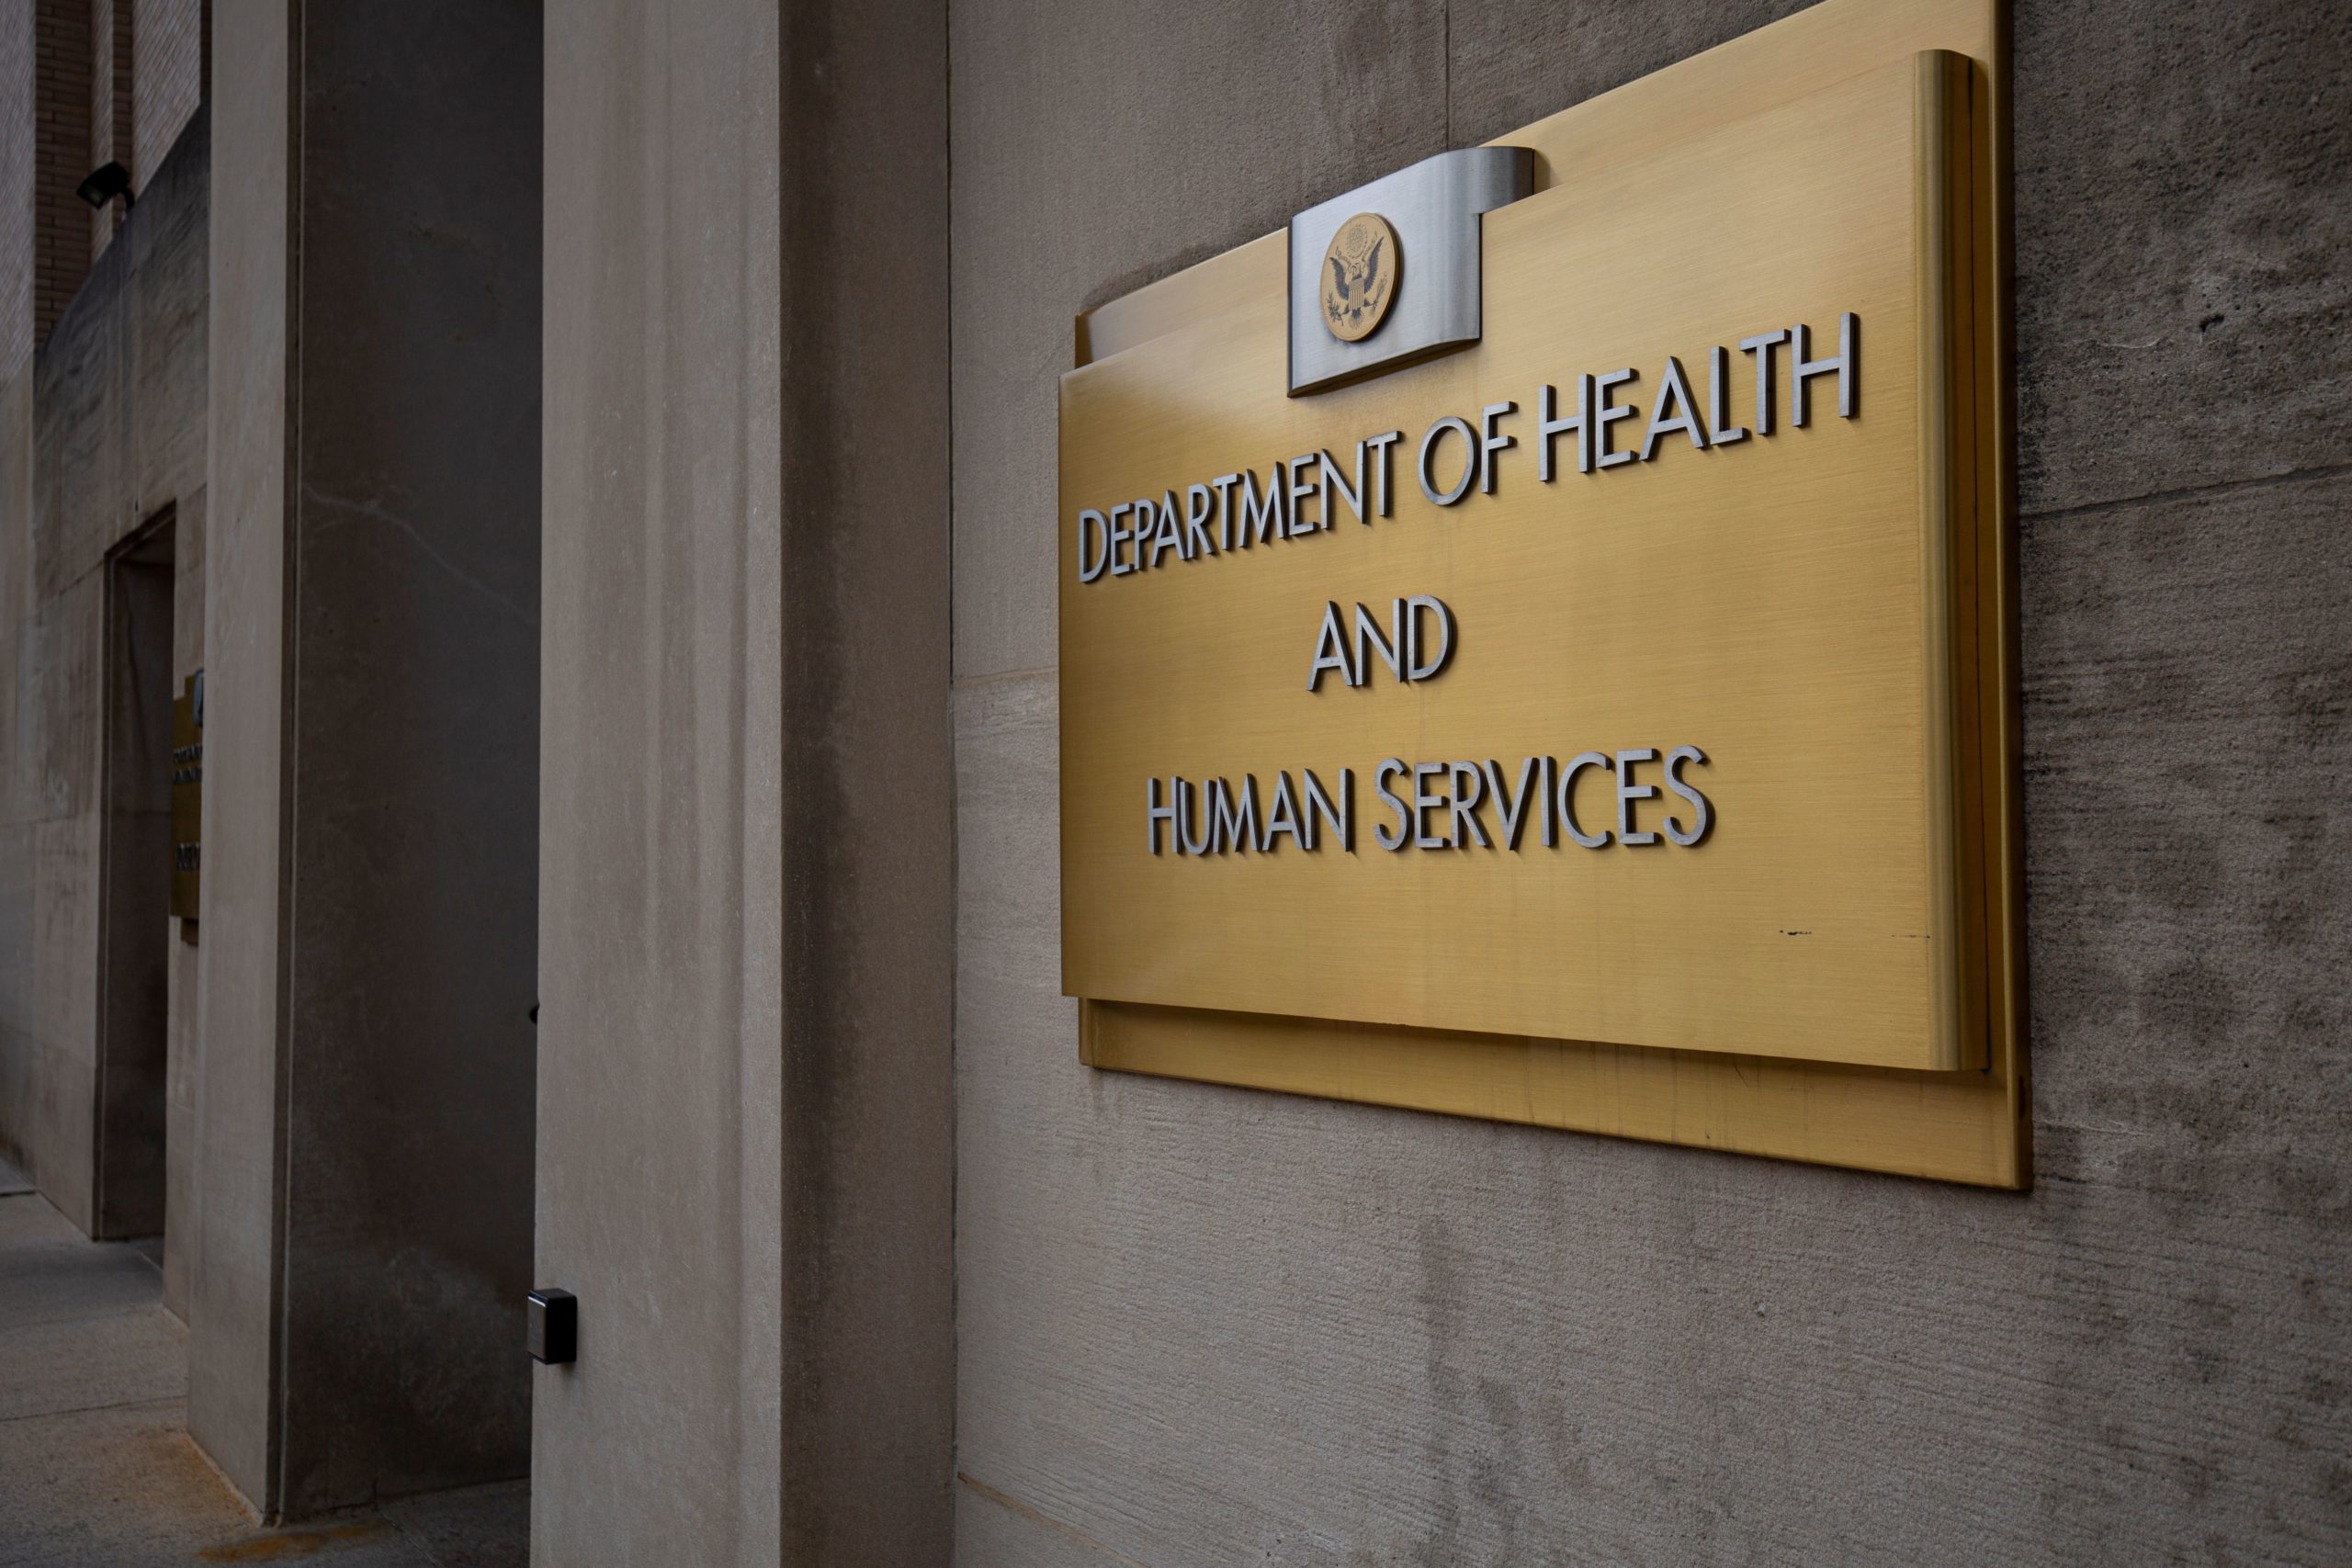 The US Department of Health and Human Services building is seen in Washington, DC, on July 22, 2019. (Photo by Alastair Pike / AFP) (Photo by ALASTAIR PIKE/AFP via Getty Images)